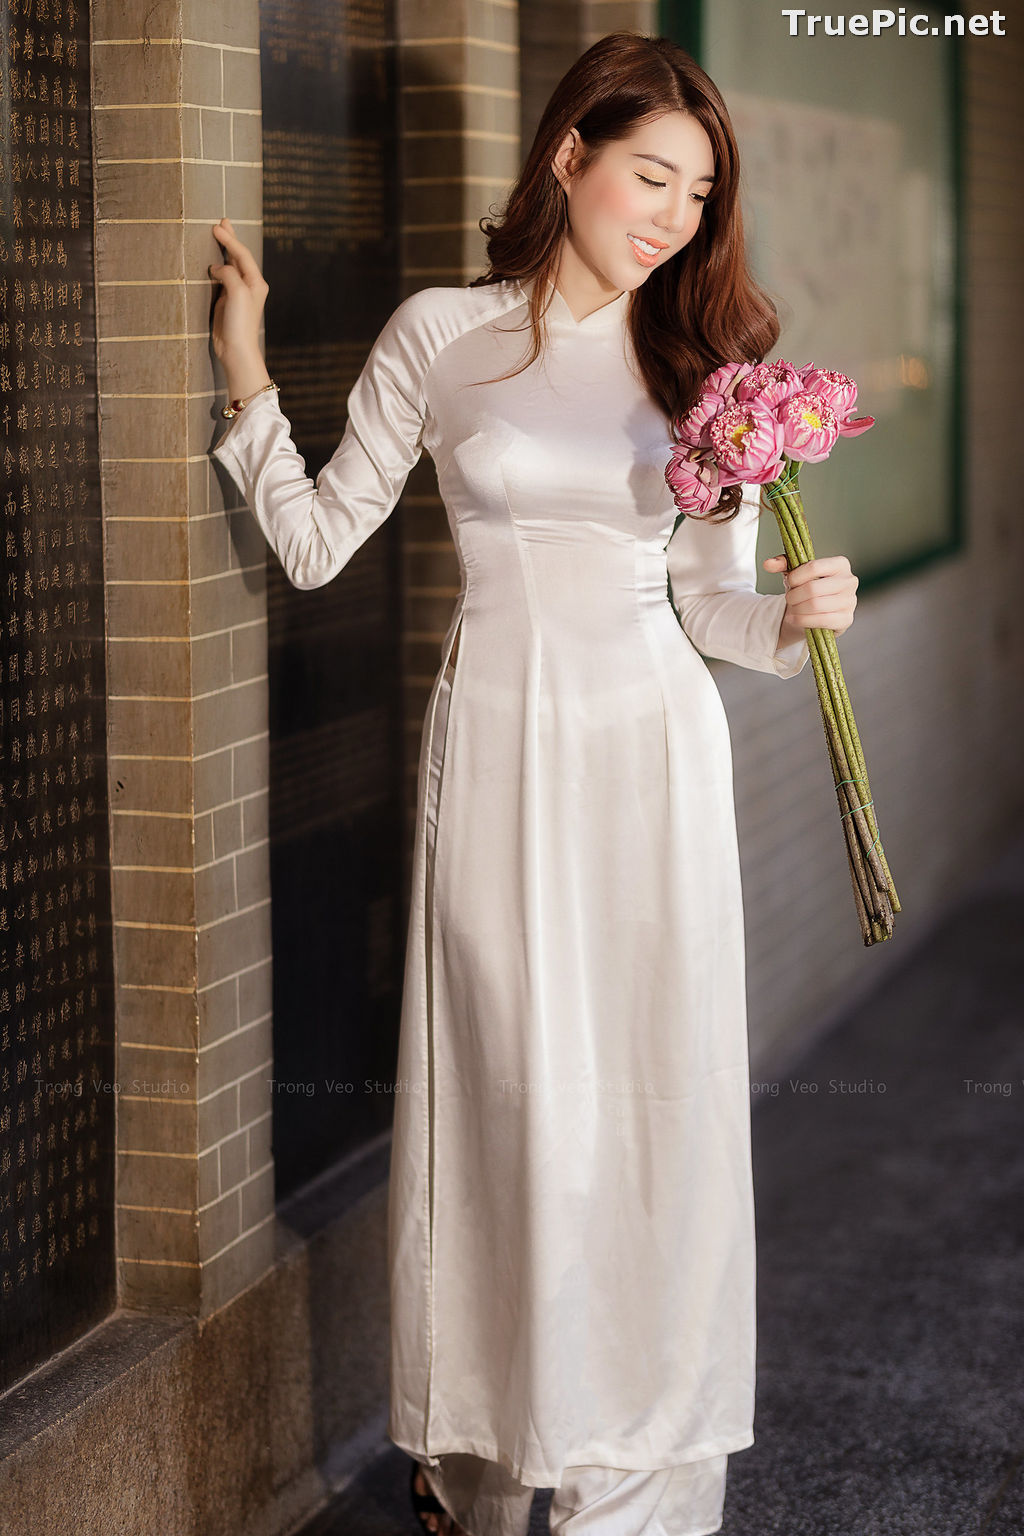 Image The Beauty of Vietnamese Girls with Traditional Dress (Ao Dai) #3 - TruePic.net - Picture-72